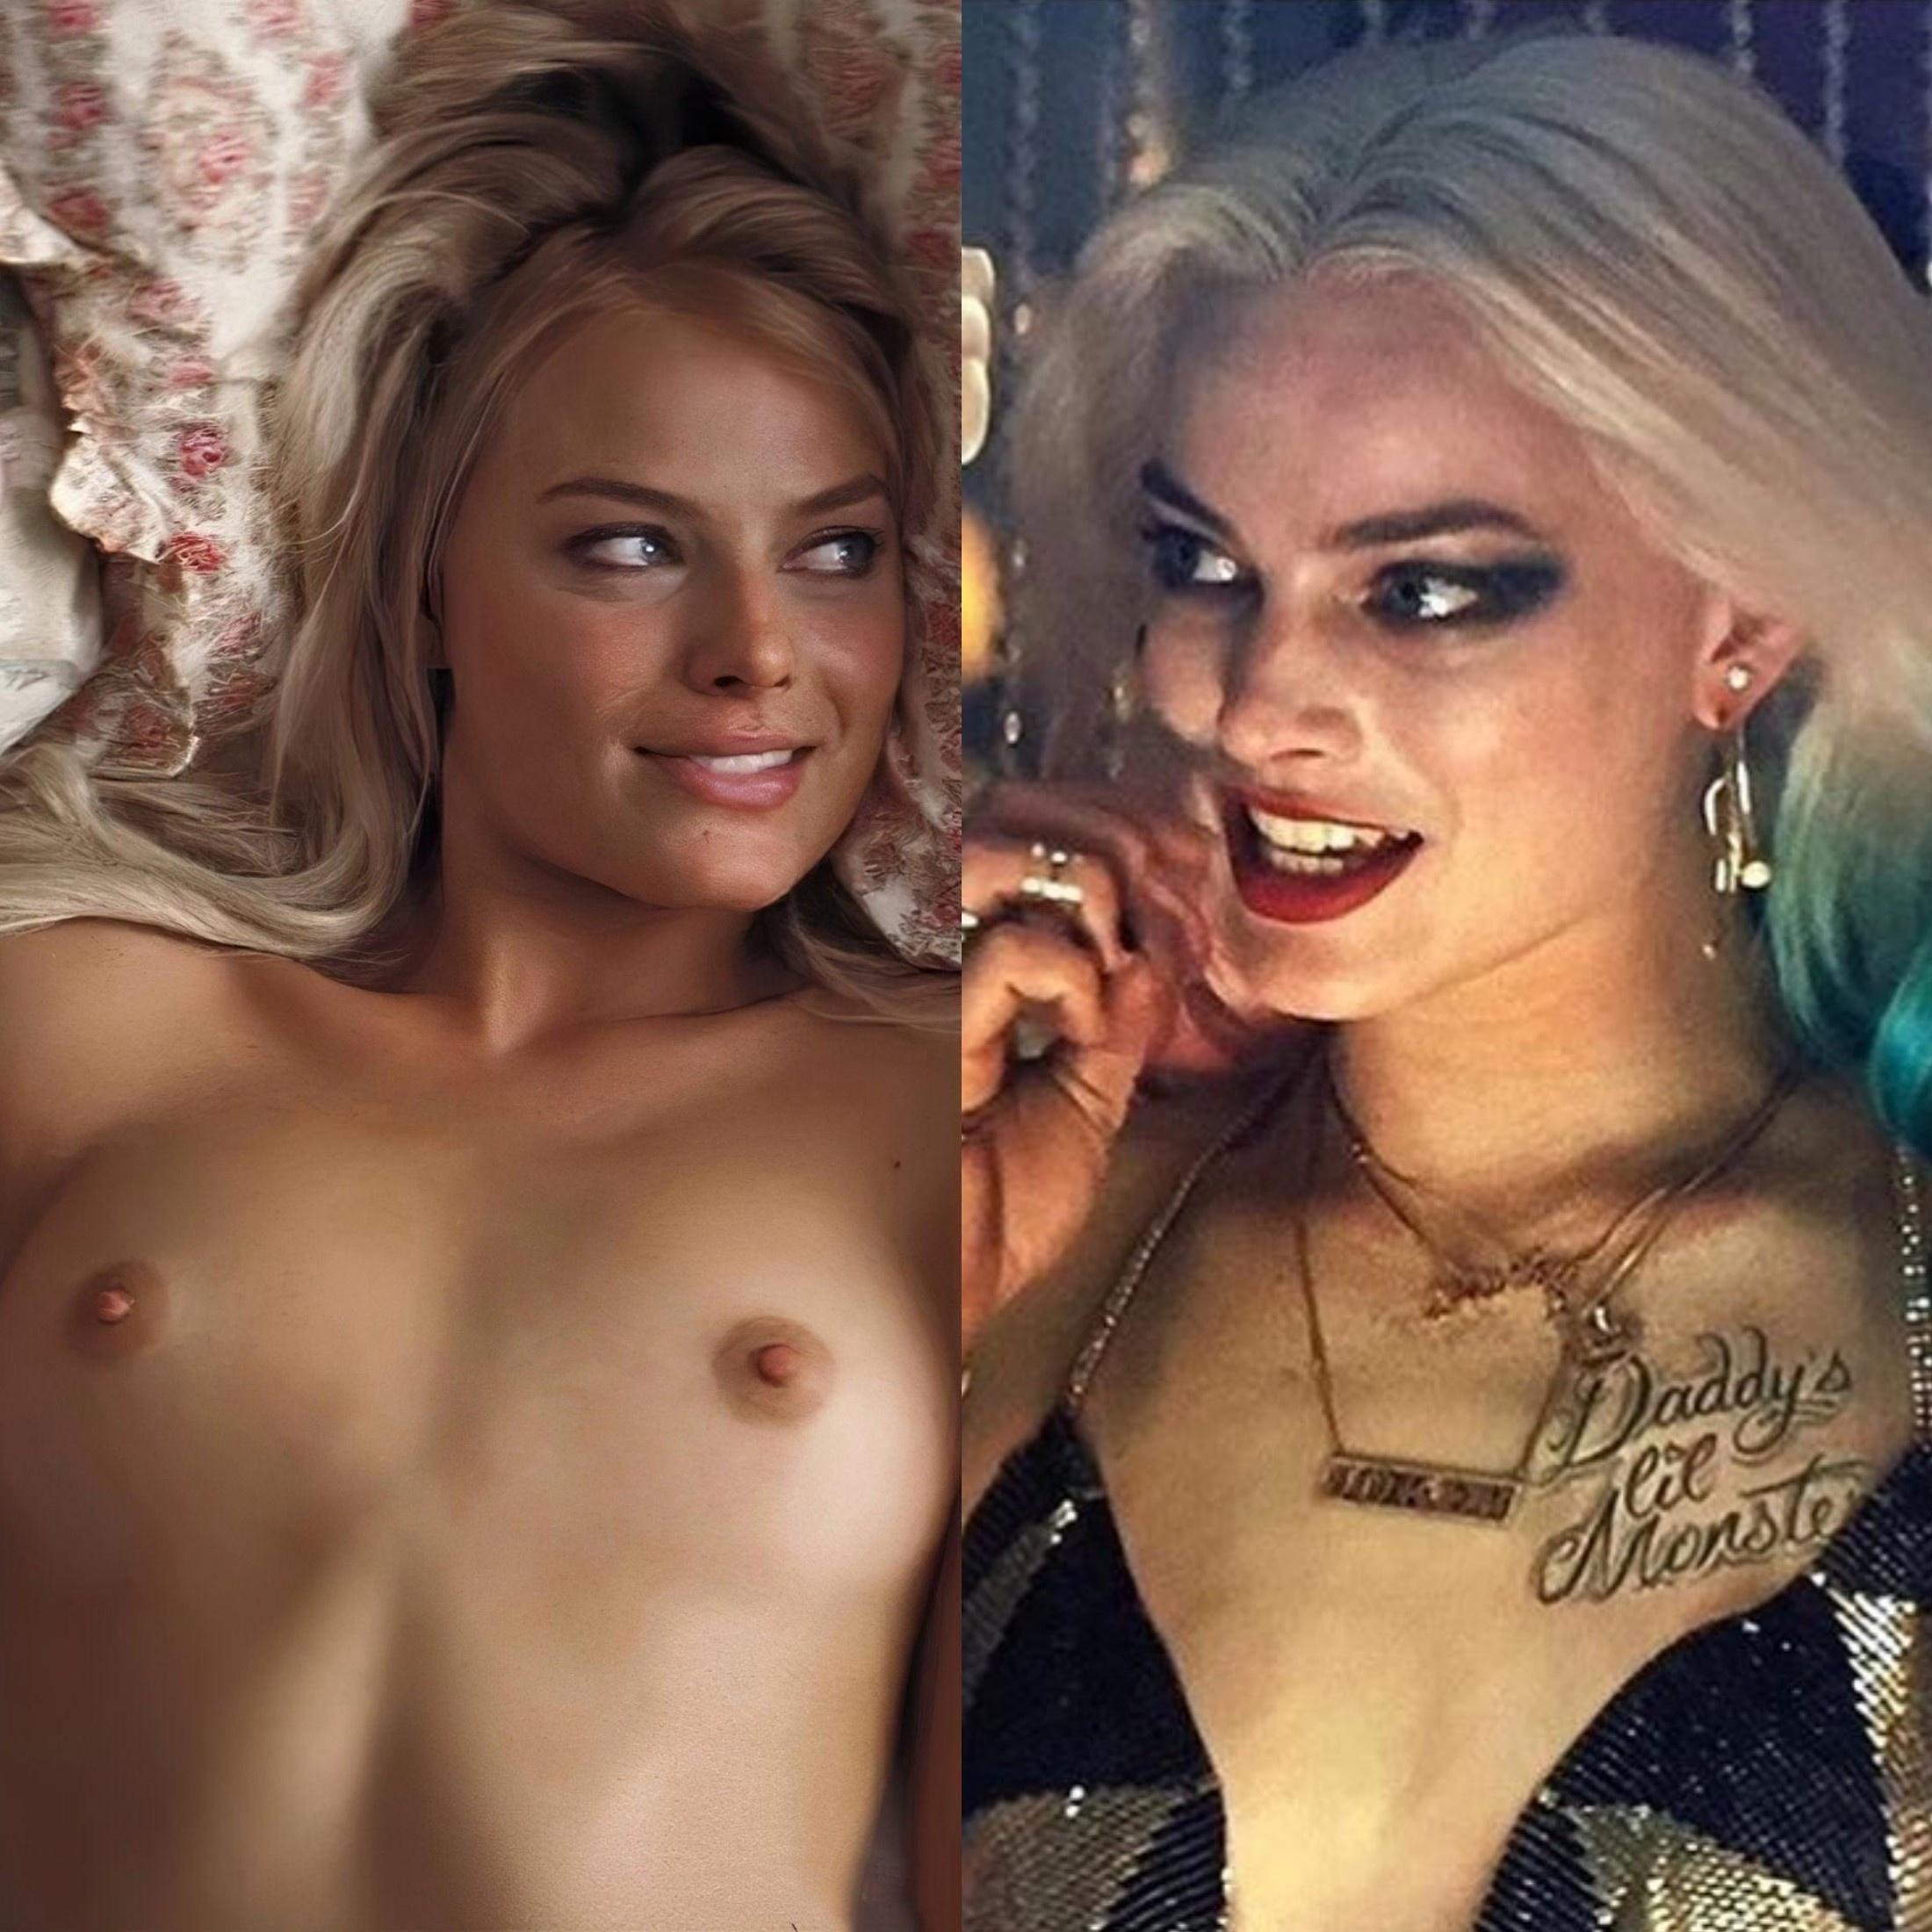 banh mi recommends margot elise robbie nude pic